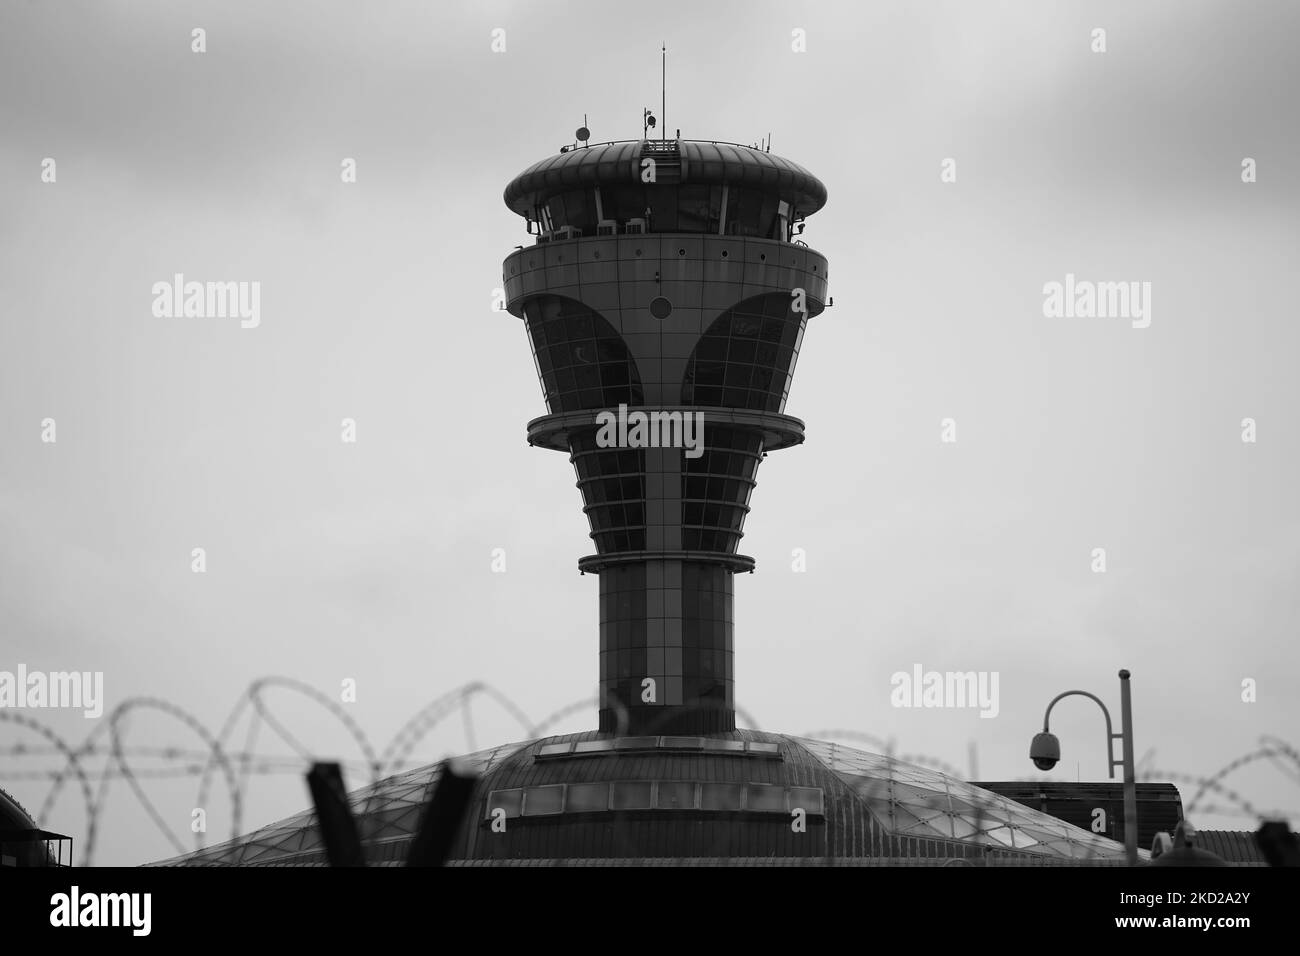 A  Control tower of the closed Liuting international airport on a cloudy day in Qingdao Liuting China Stock Photo